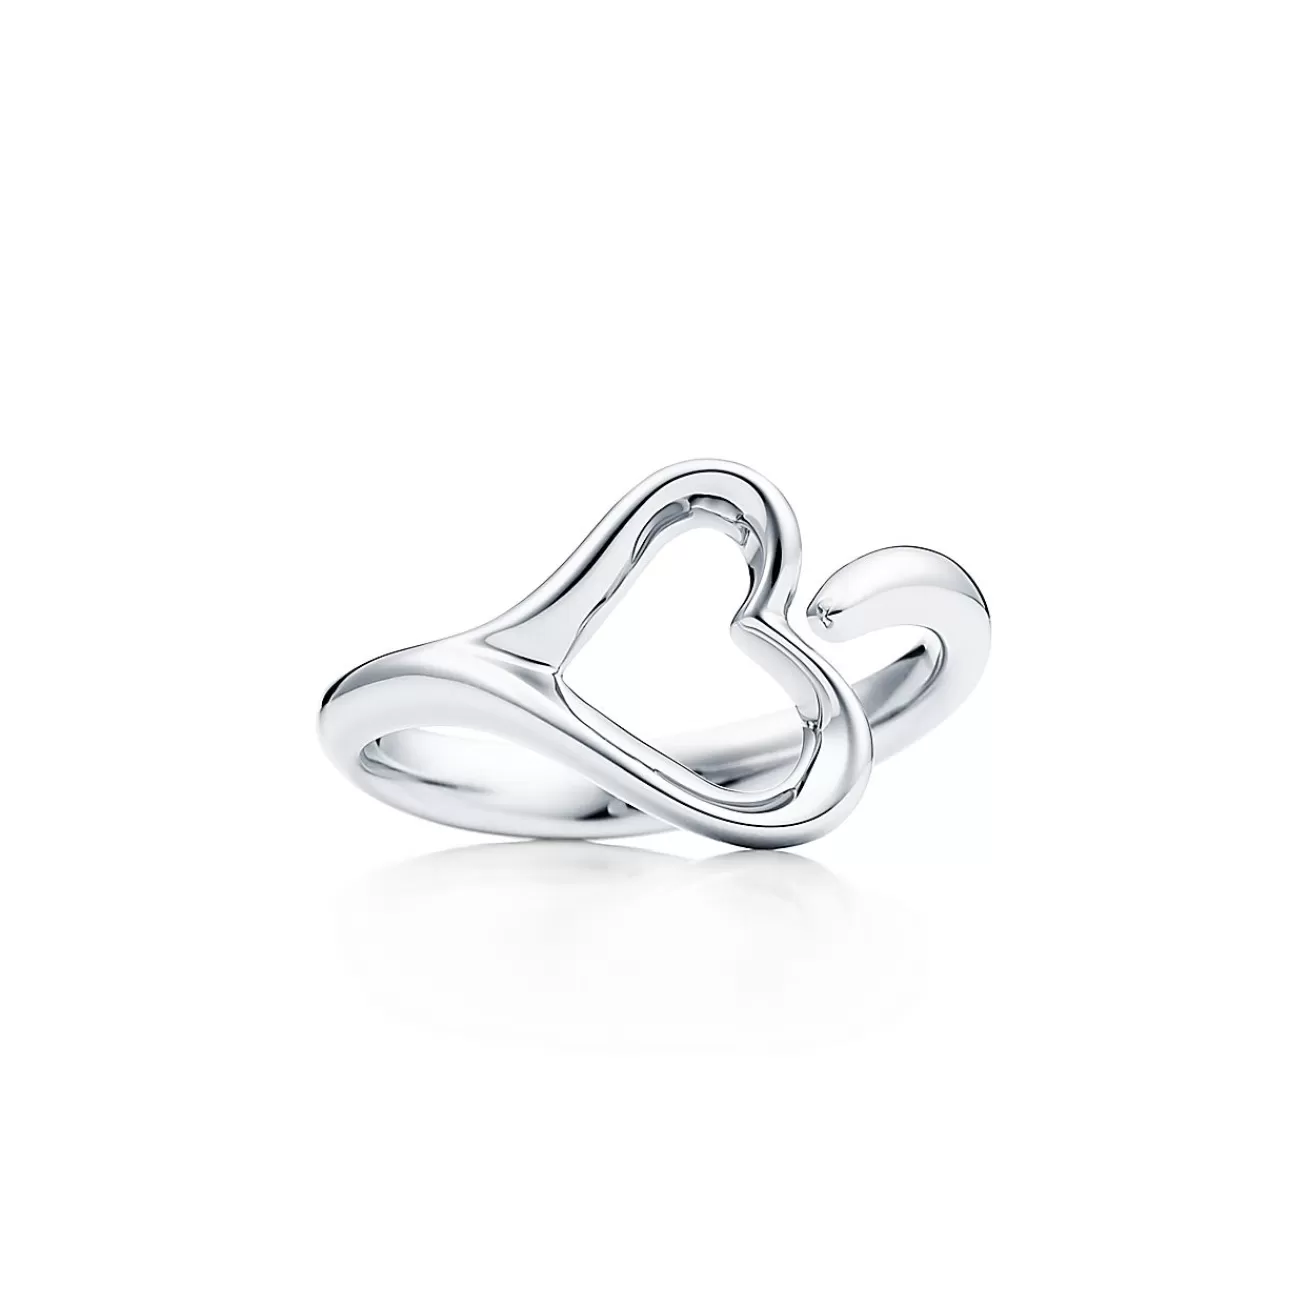 Tiffany & Co. Elsa Peretti® Open Heart ring in sterling silver, small. | ^ Rings | Sterling Silver Jewelry